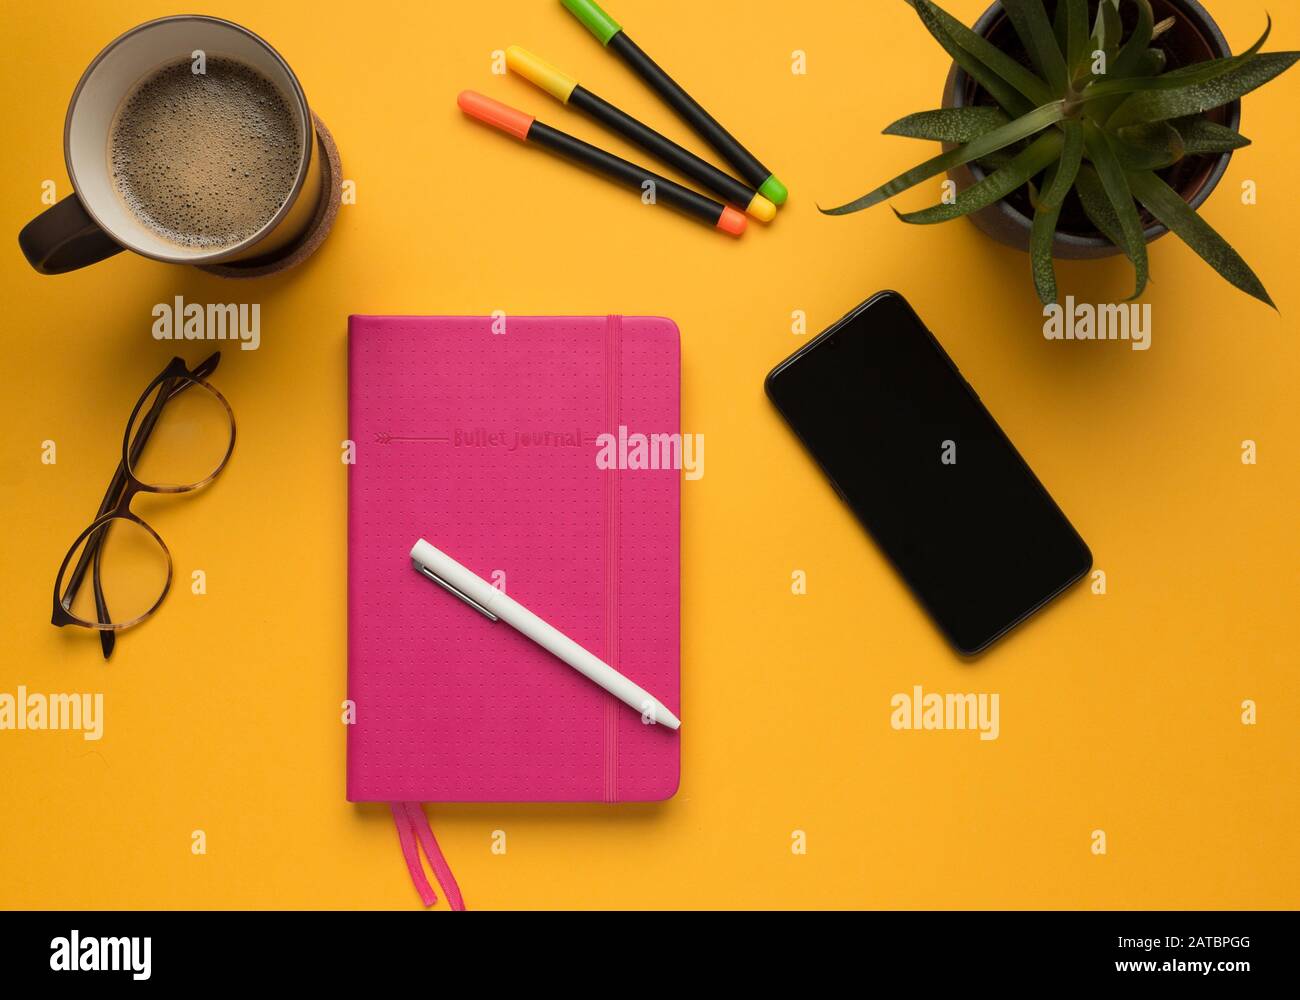 Stock photo of a pink diary with pencil, smartphone and some desktop objects on a yellow background Stock Photo